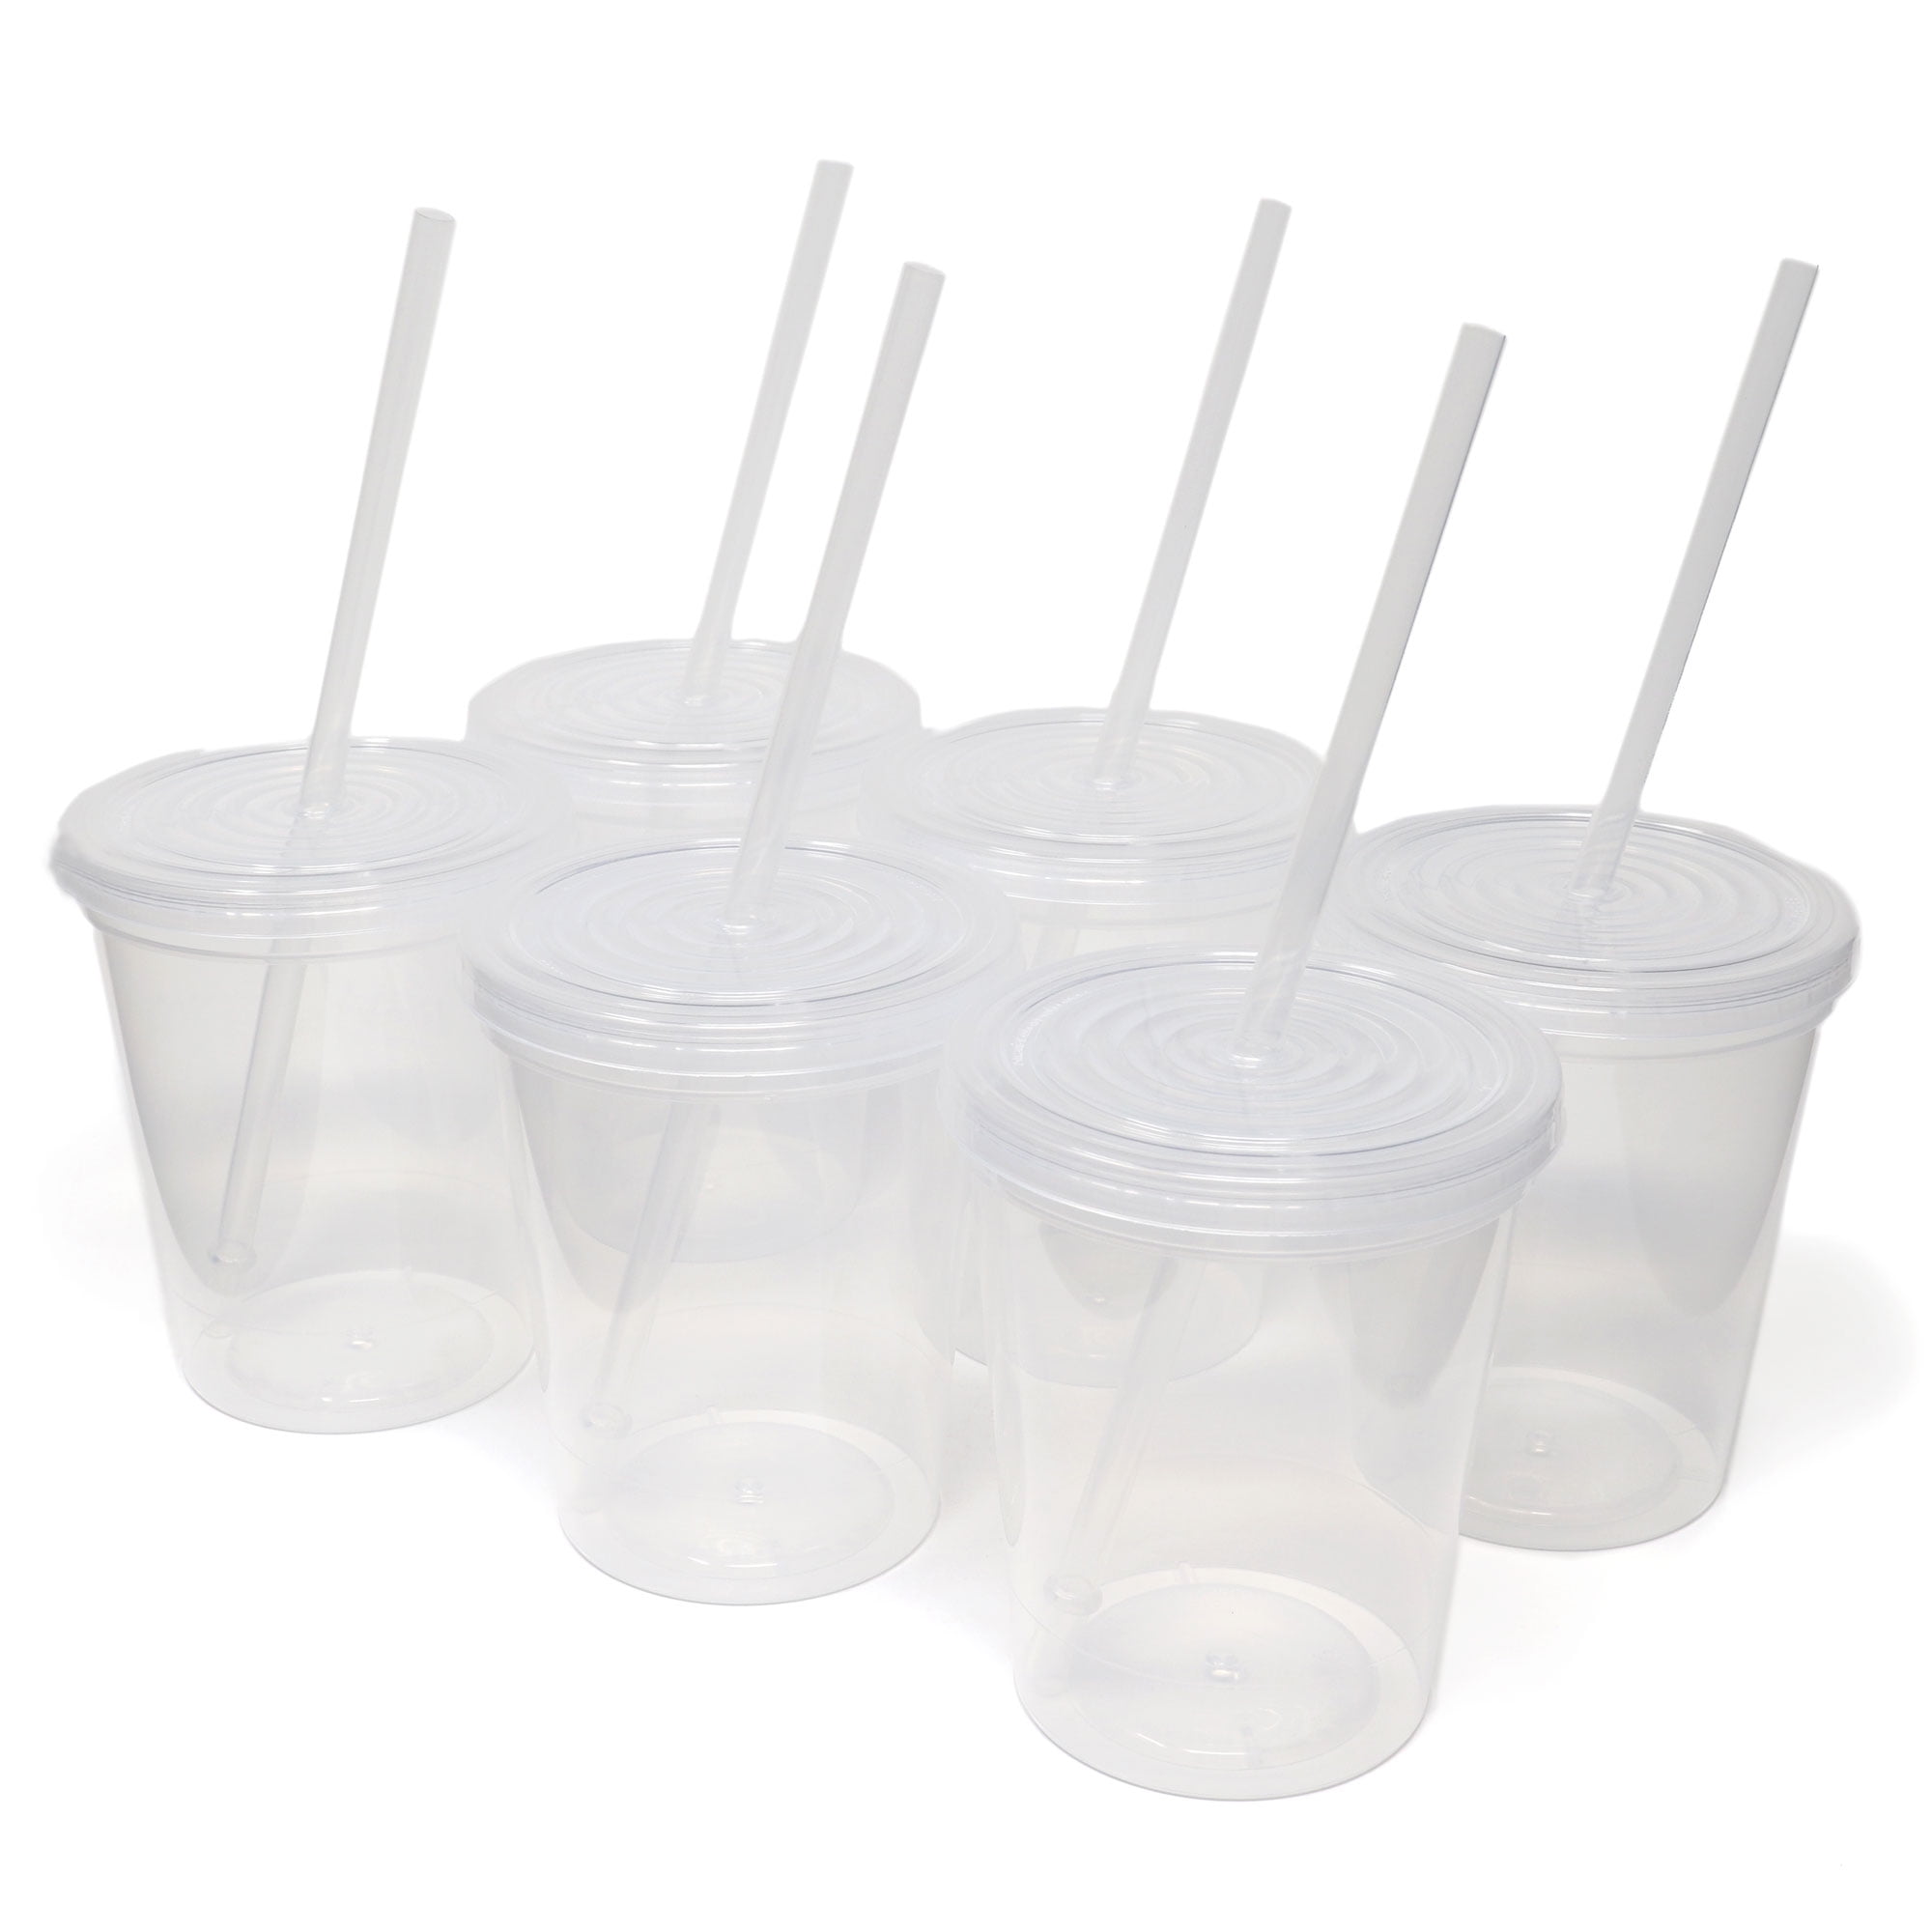 LEIFEOSH Plastic Tumblers with Lids and Straws, 36 Pcs Reusable Cups with  Lids Plastic Colorful Cups…See more LEIFEOSH Plastic Tumblers with Lids and